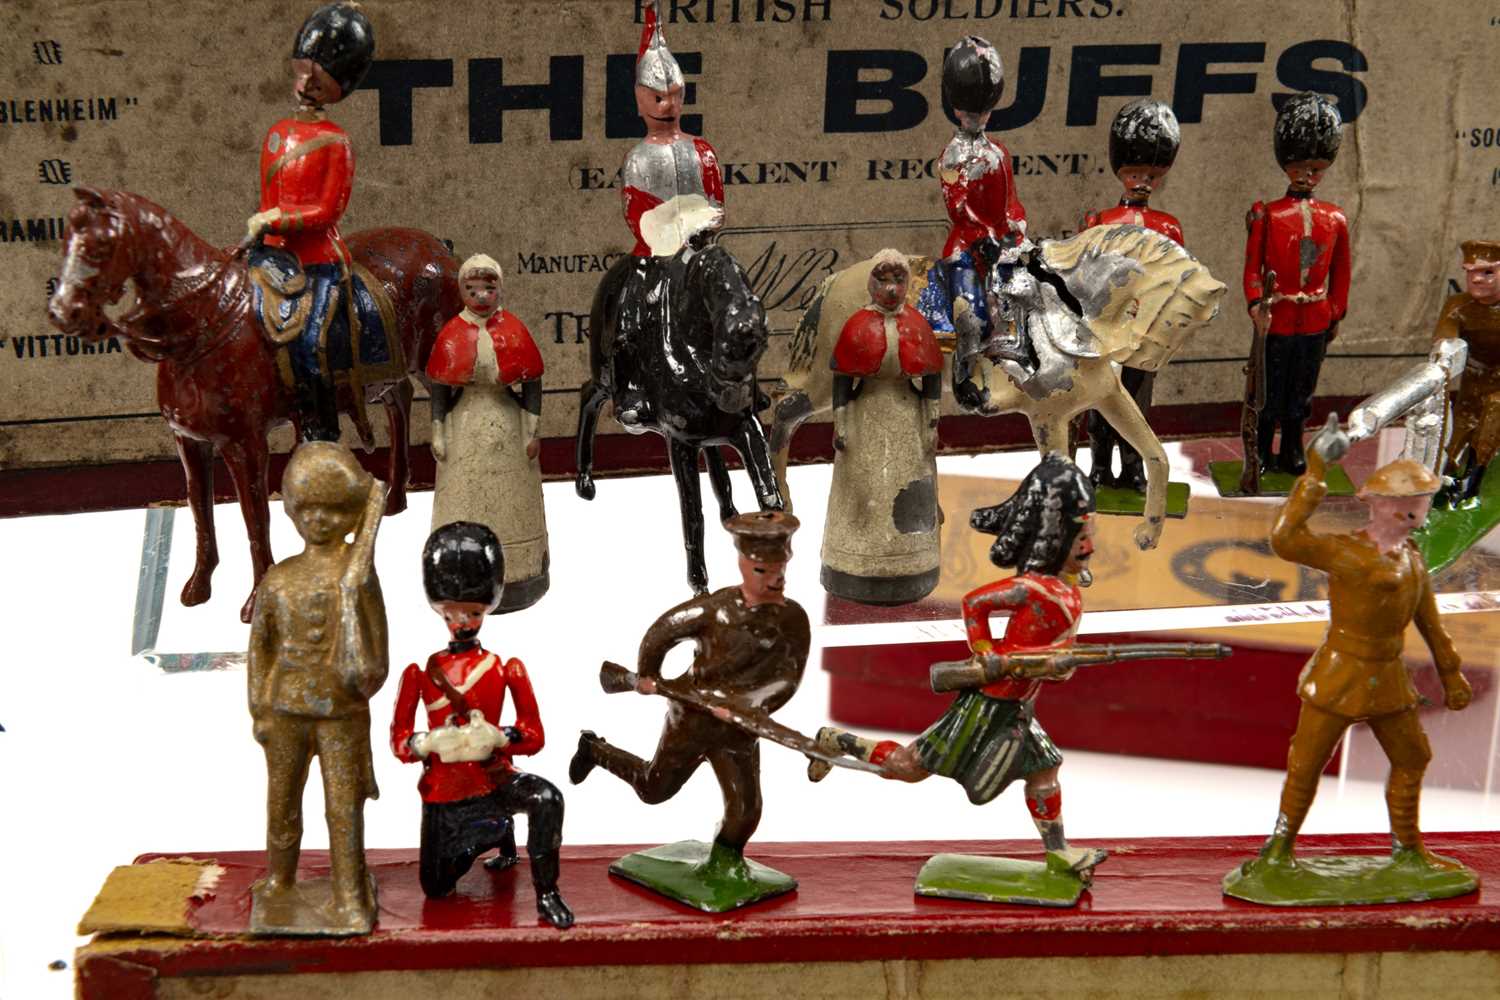 THE MILITARY CLUB HOUSE: W BRITAIN'S BRITISH SOLDIERS & IRISH HANDPAINTED LEAD SOLDIERS, large - Image 3 of 8